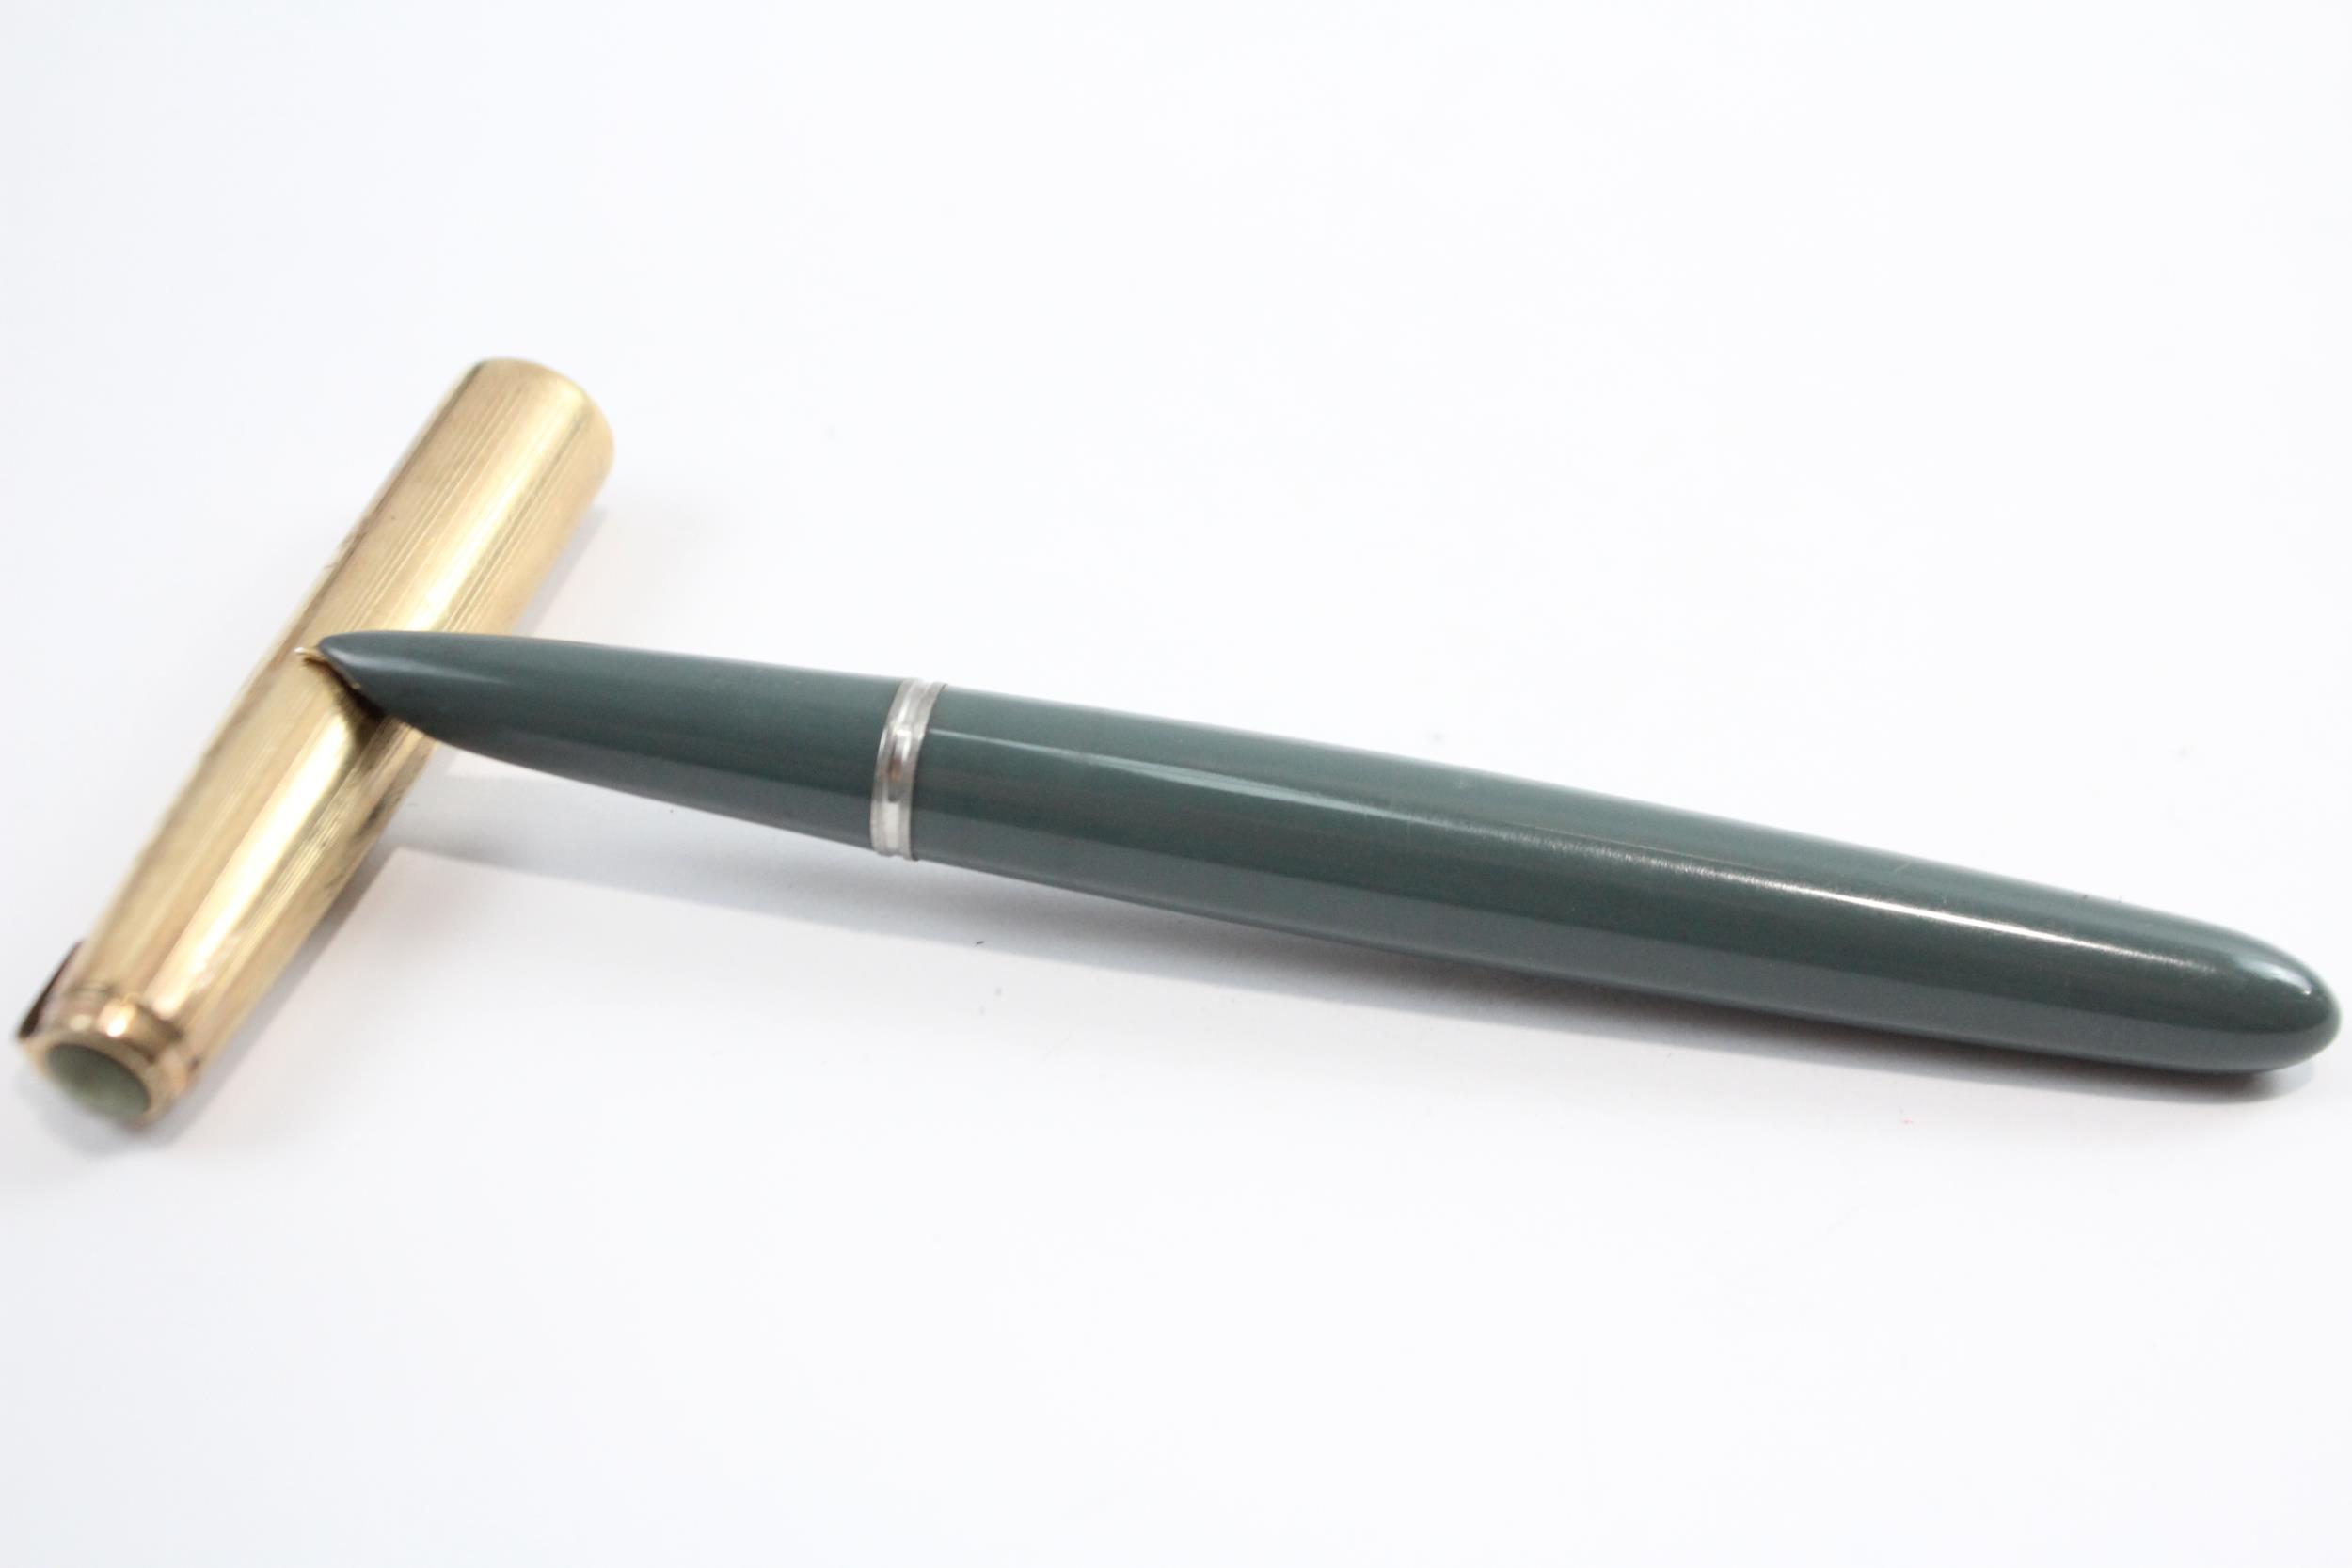 Vintage PARKER 51 Grey FOUNTAIN PEN w/ Rolled Gold Cap WRITING // Dip Tested & WRITING In vintage